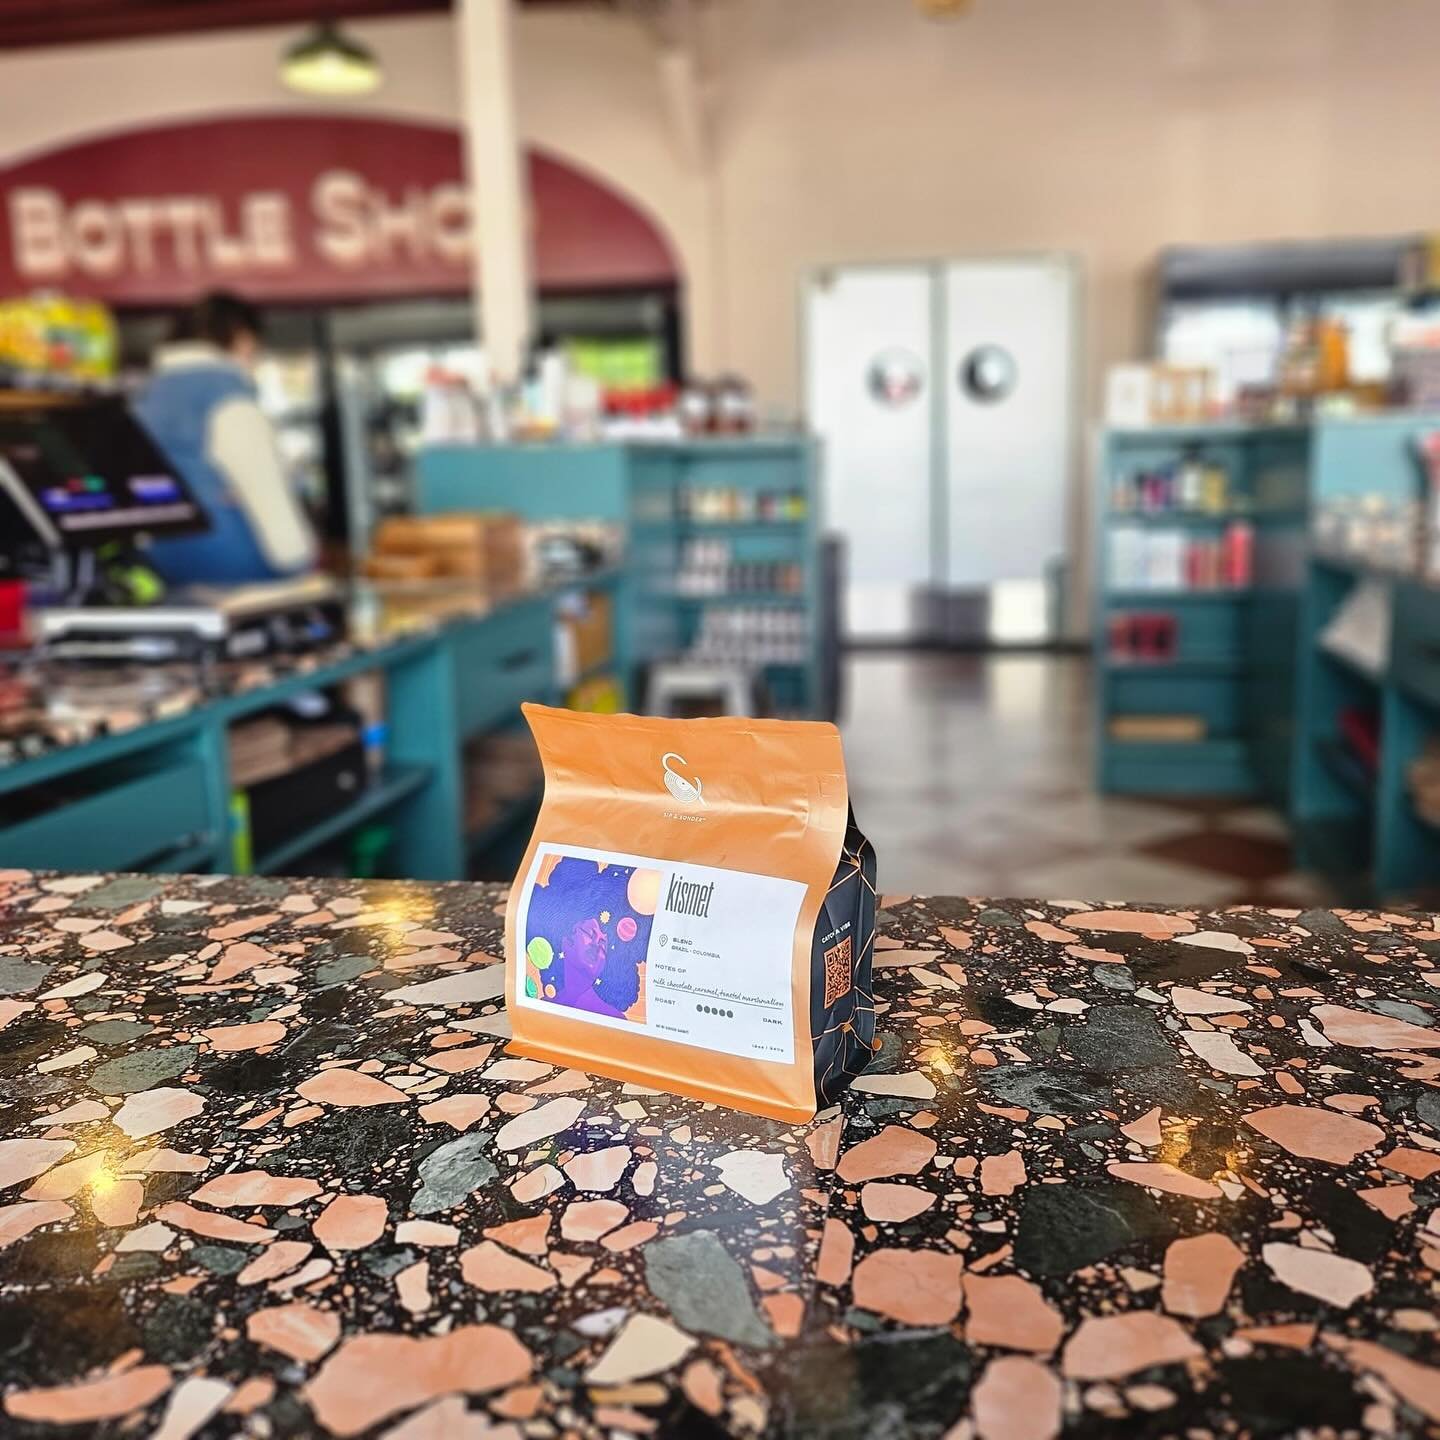 Isn&rsquo;t she lovelyyyy? 🥰 You can now find @SipandSonder&rsquo;s KISMET coffee @carlasfreshmarket in Highland Park! KISMET is our rich and alluring dark blend with coffee from the lands of Brazil and Colombia, offering decadent notes of milk choc